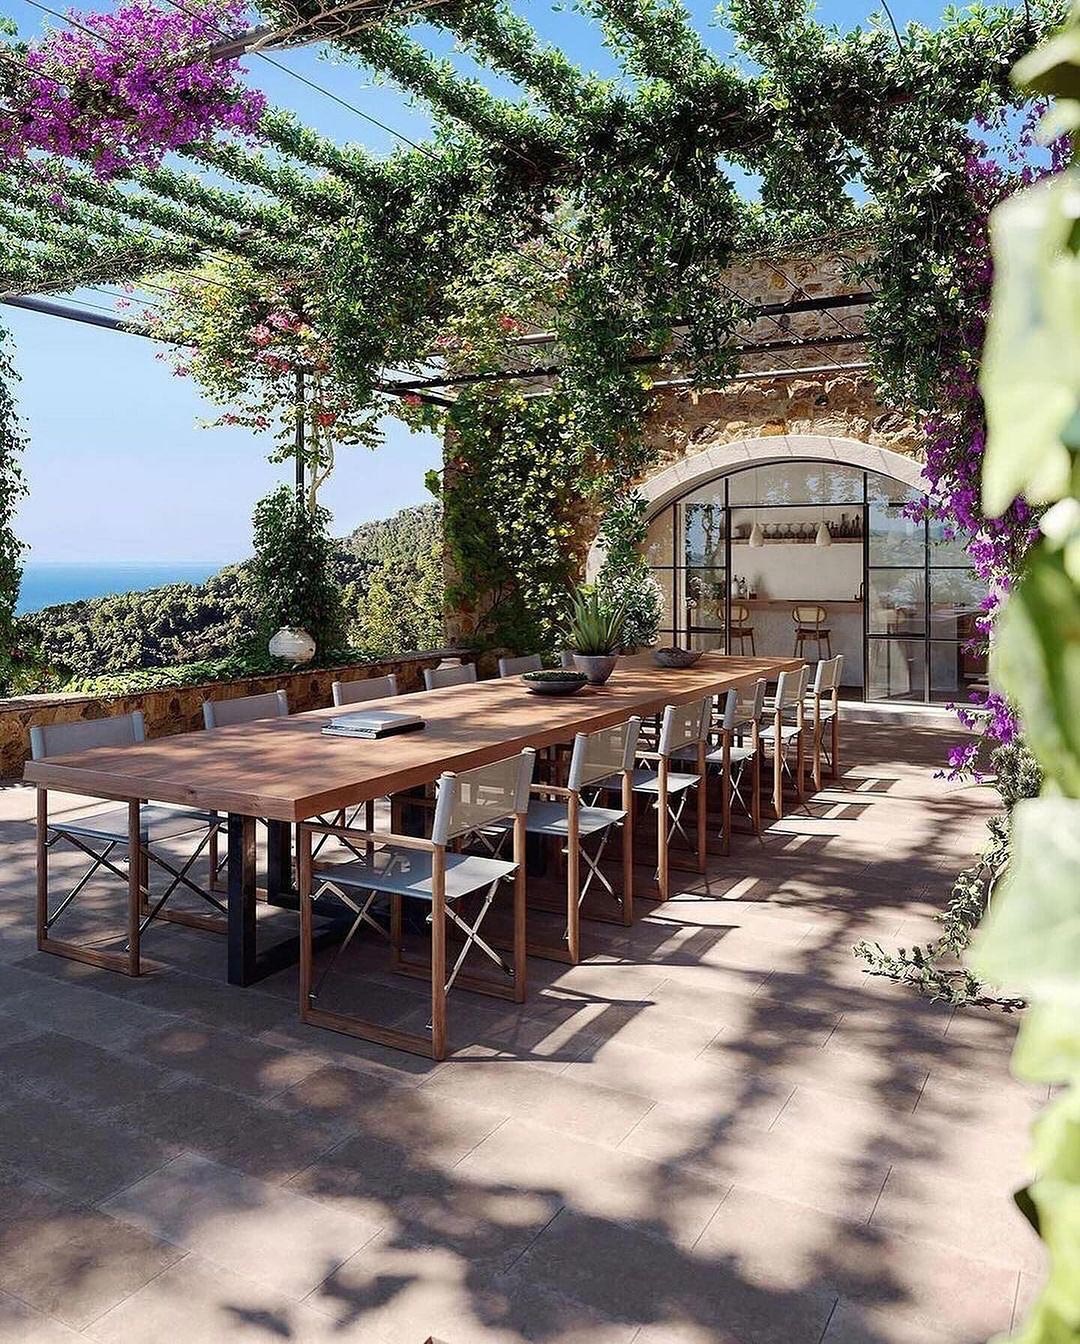 Spanish Style Dream Home outdoor patio eating dining